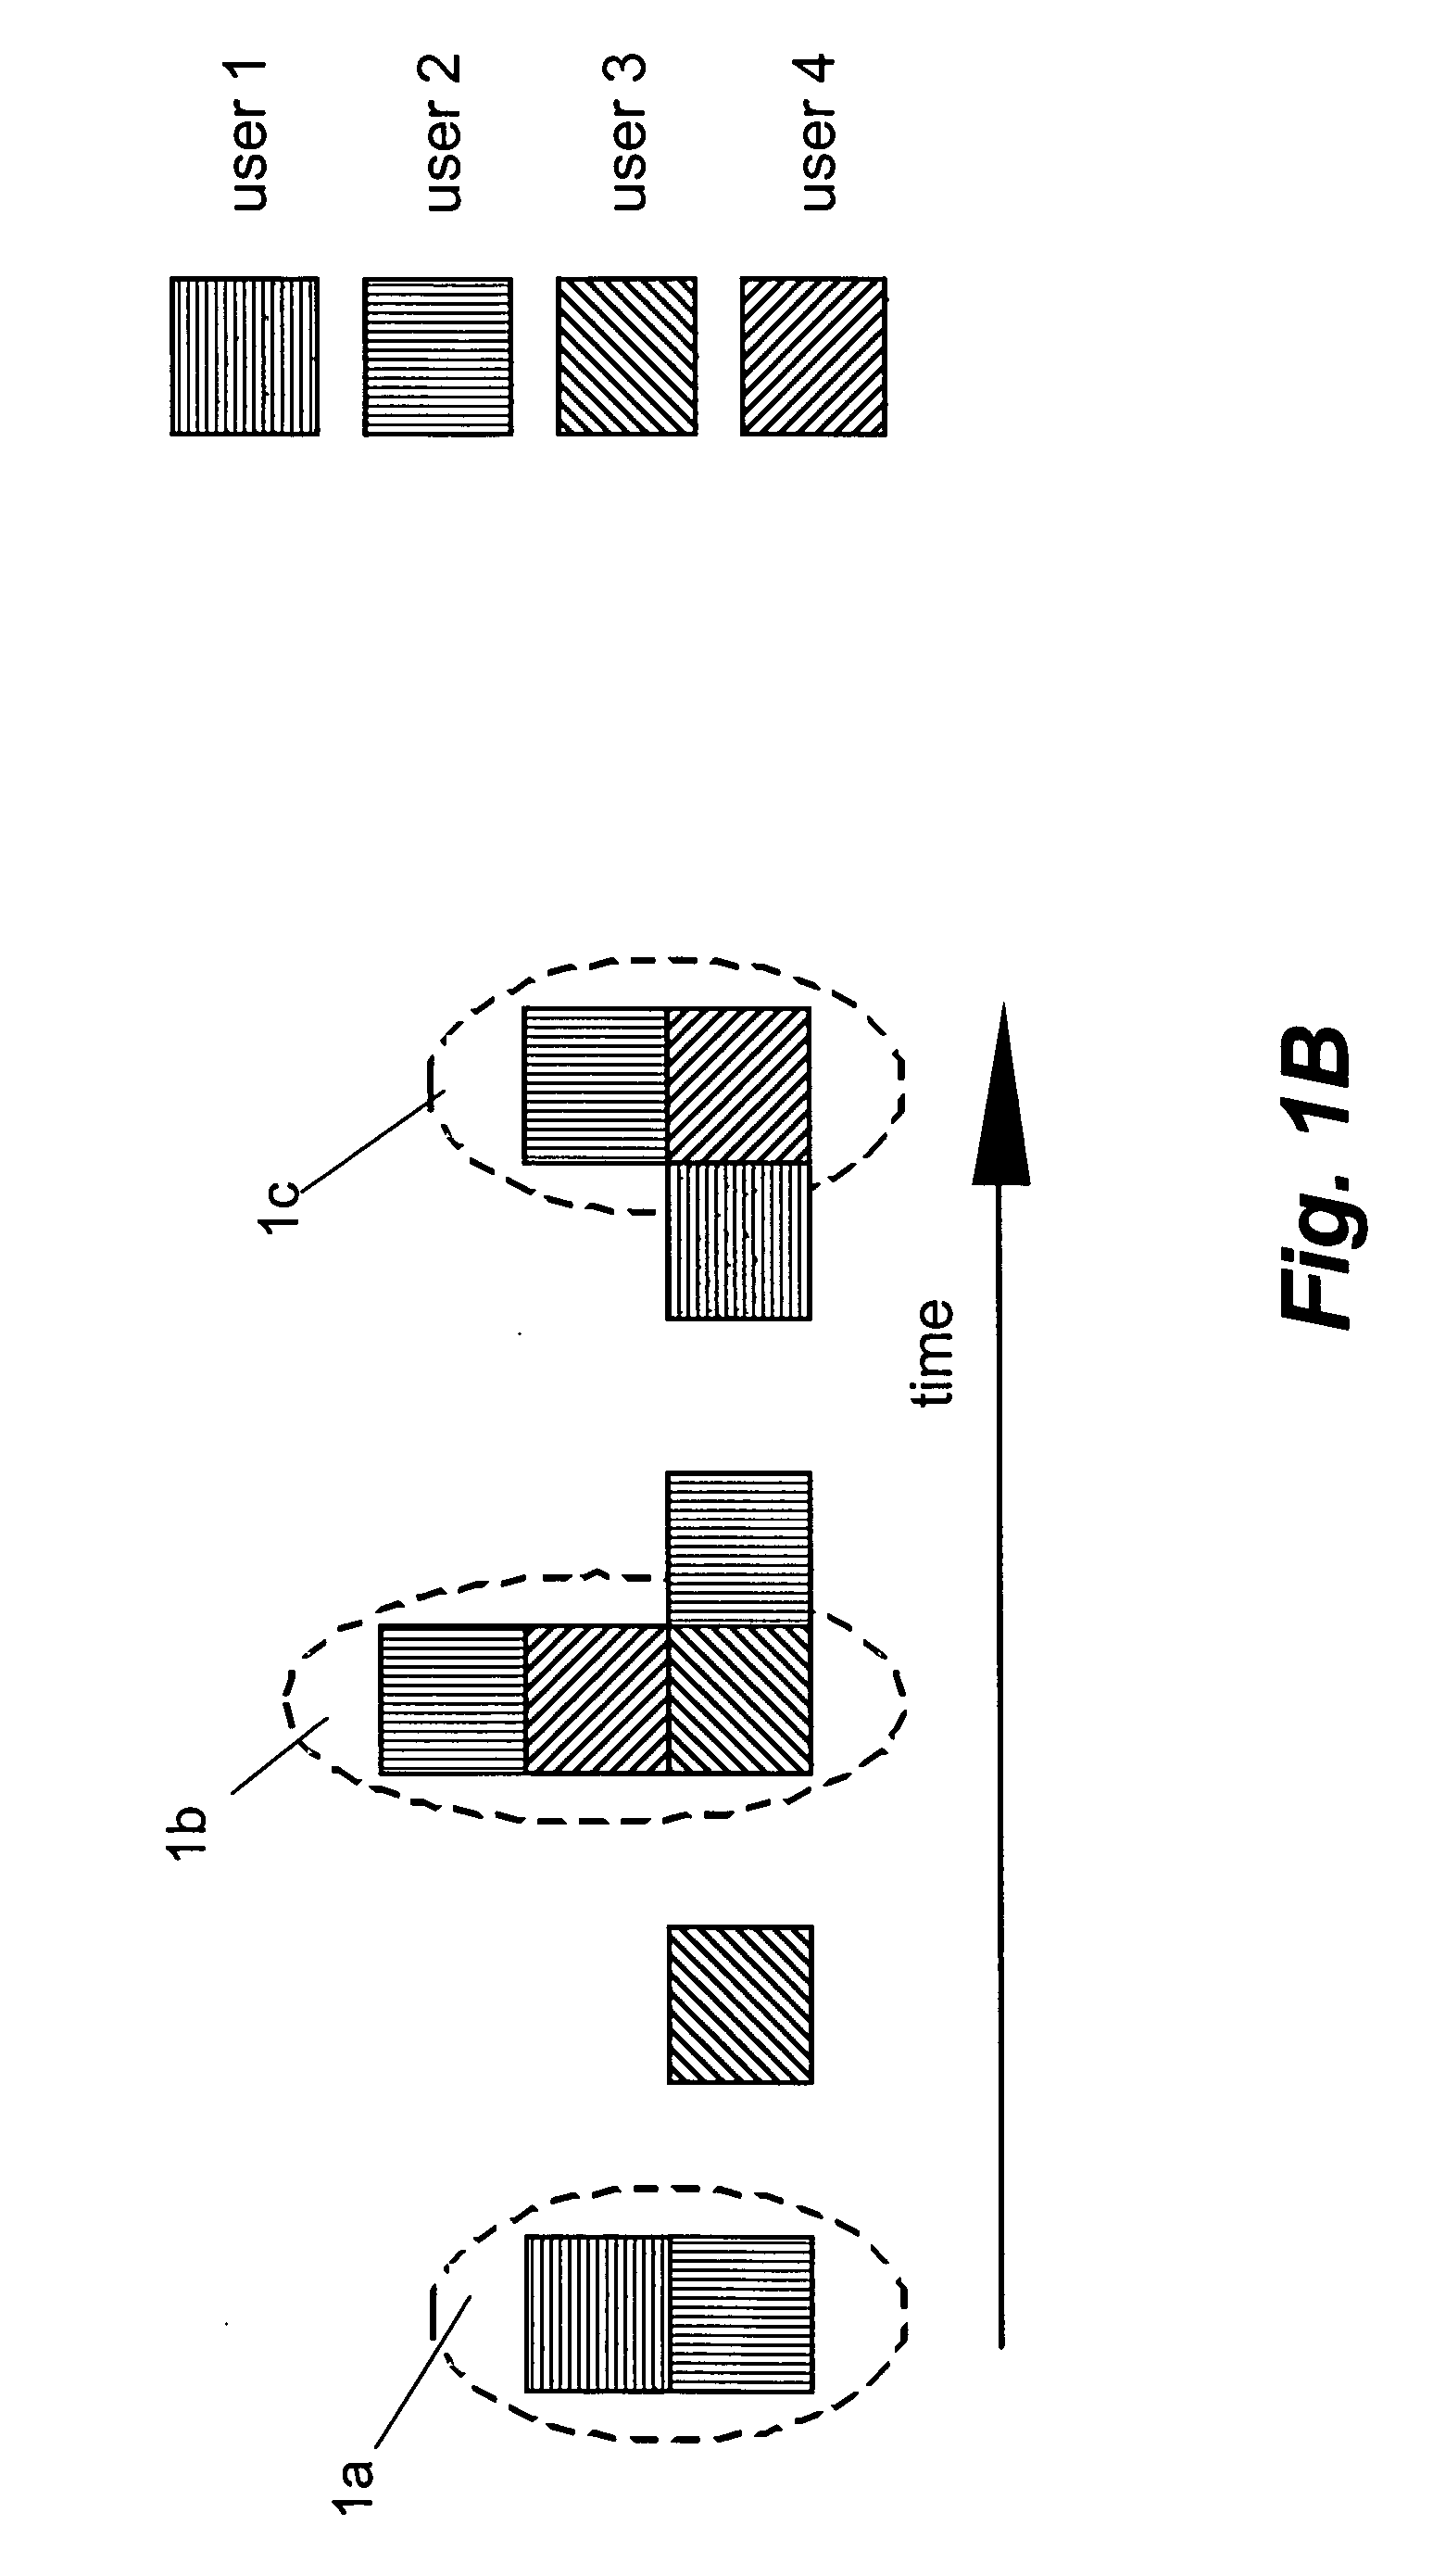 Frequency domain unscheduled transmission in a TDD wireless communications system